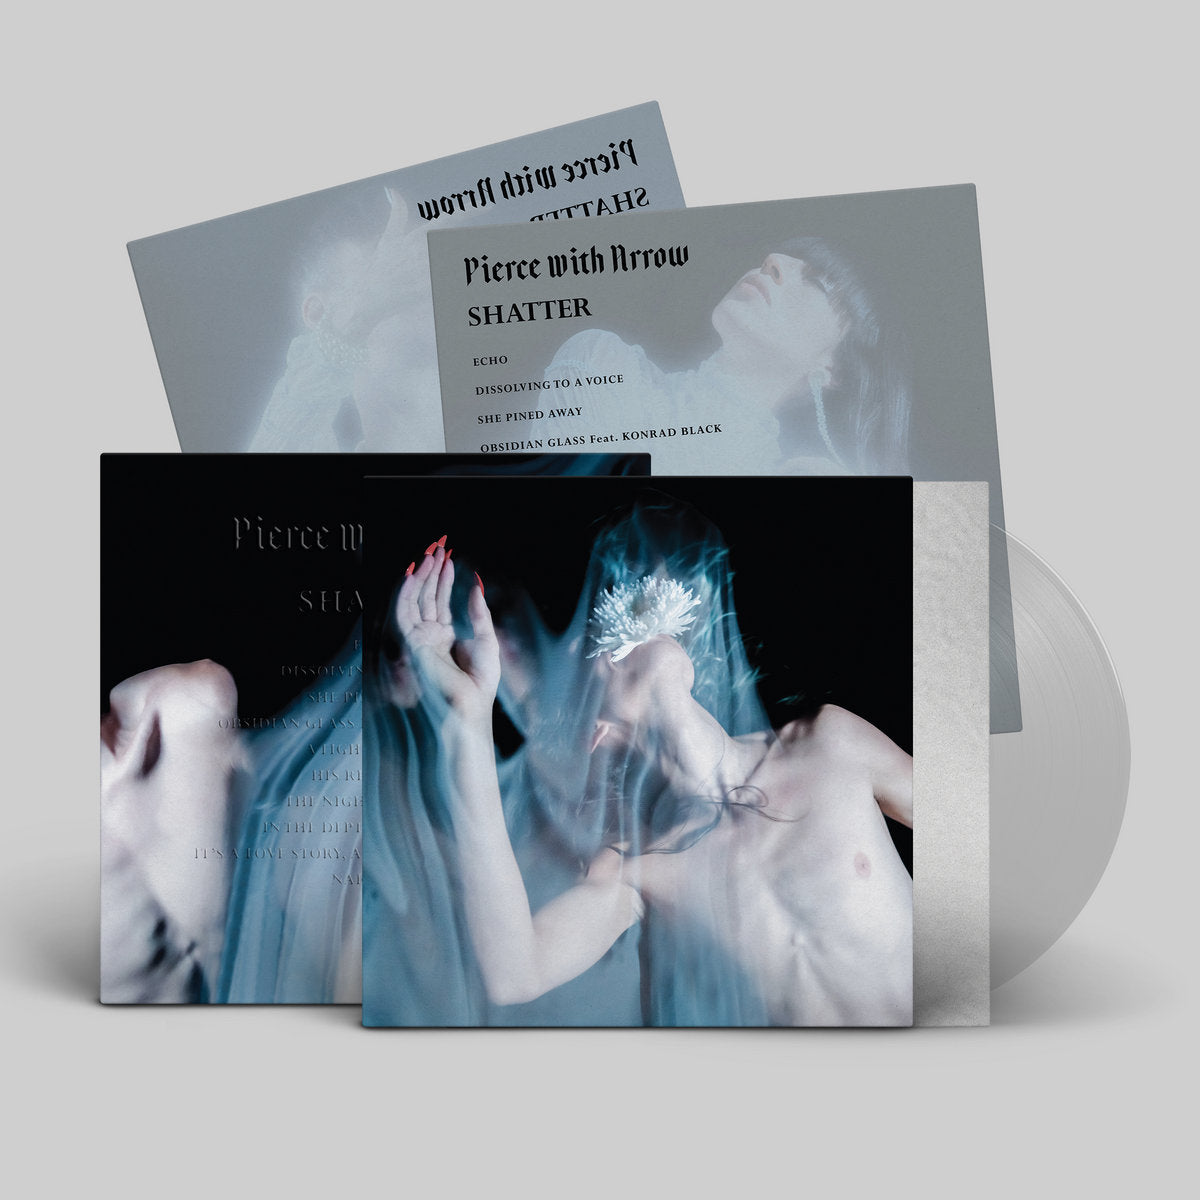 Pierce With Arrow - Shatter (Limited Edition of 750 on Clear Vinyl)